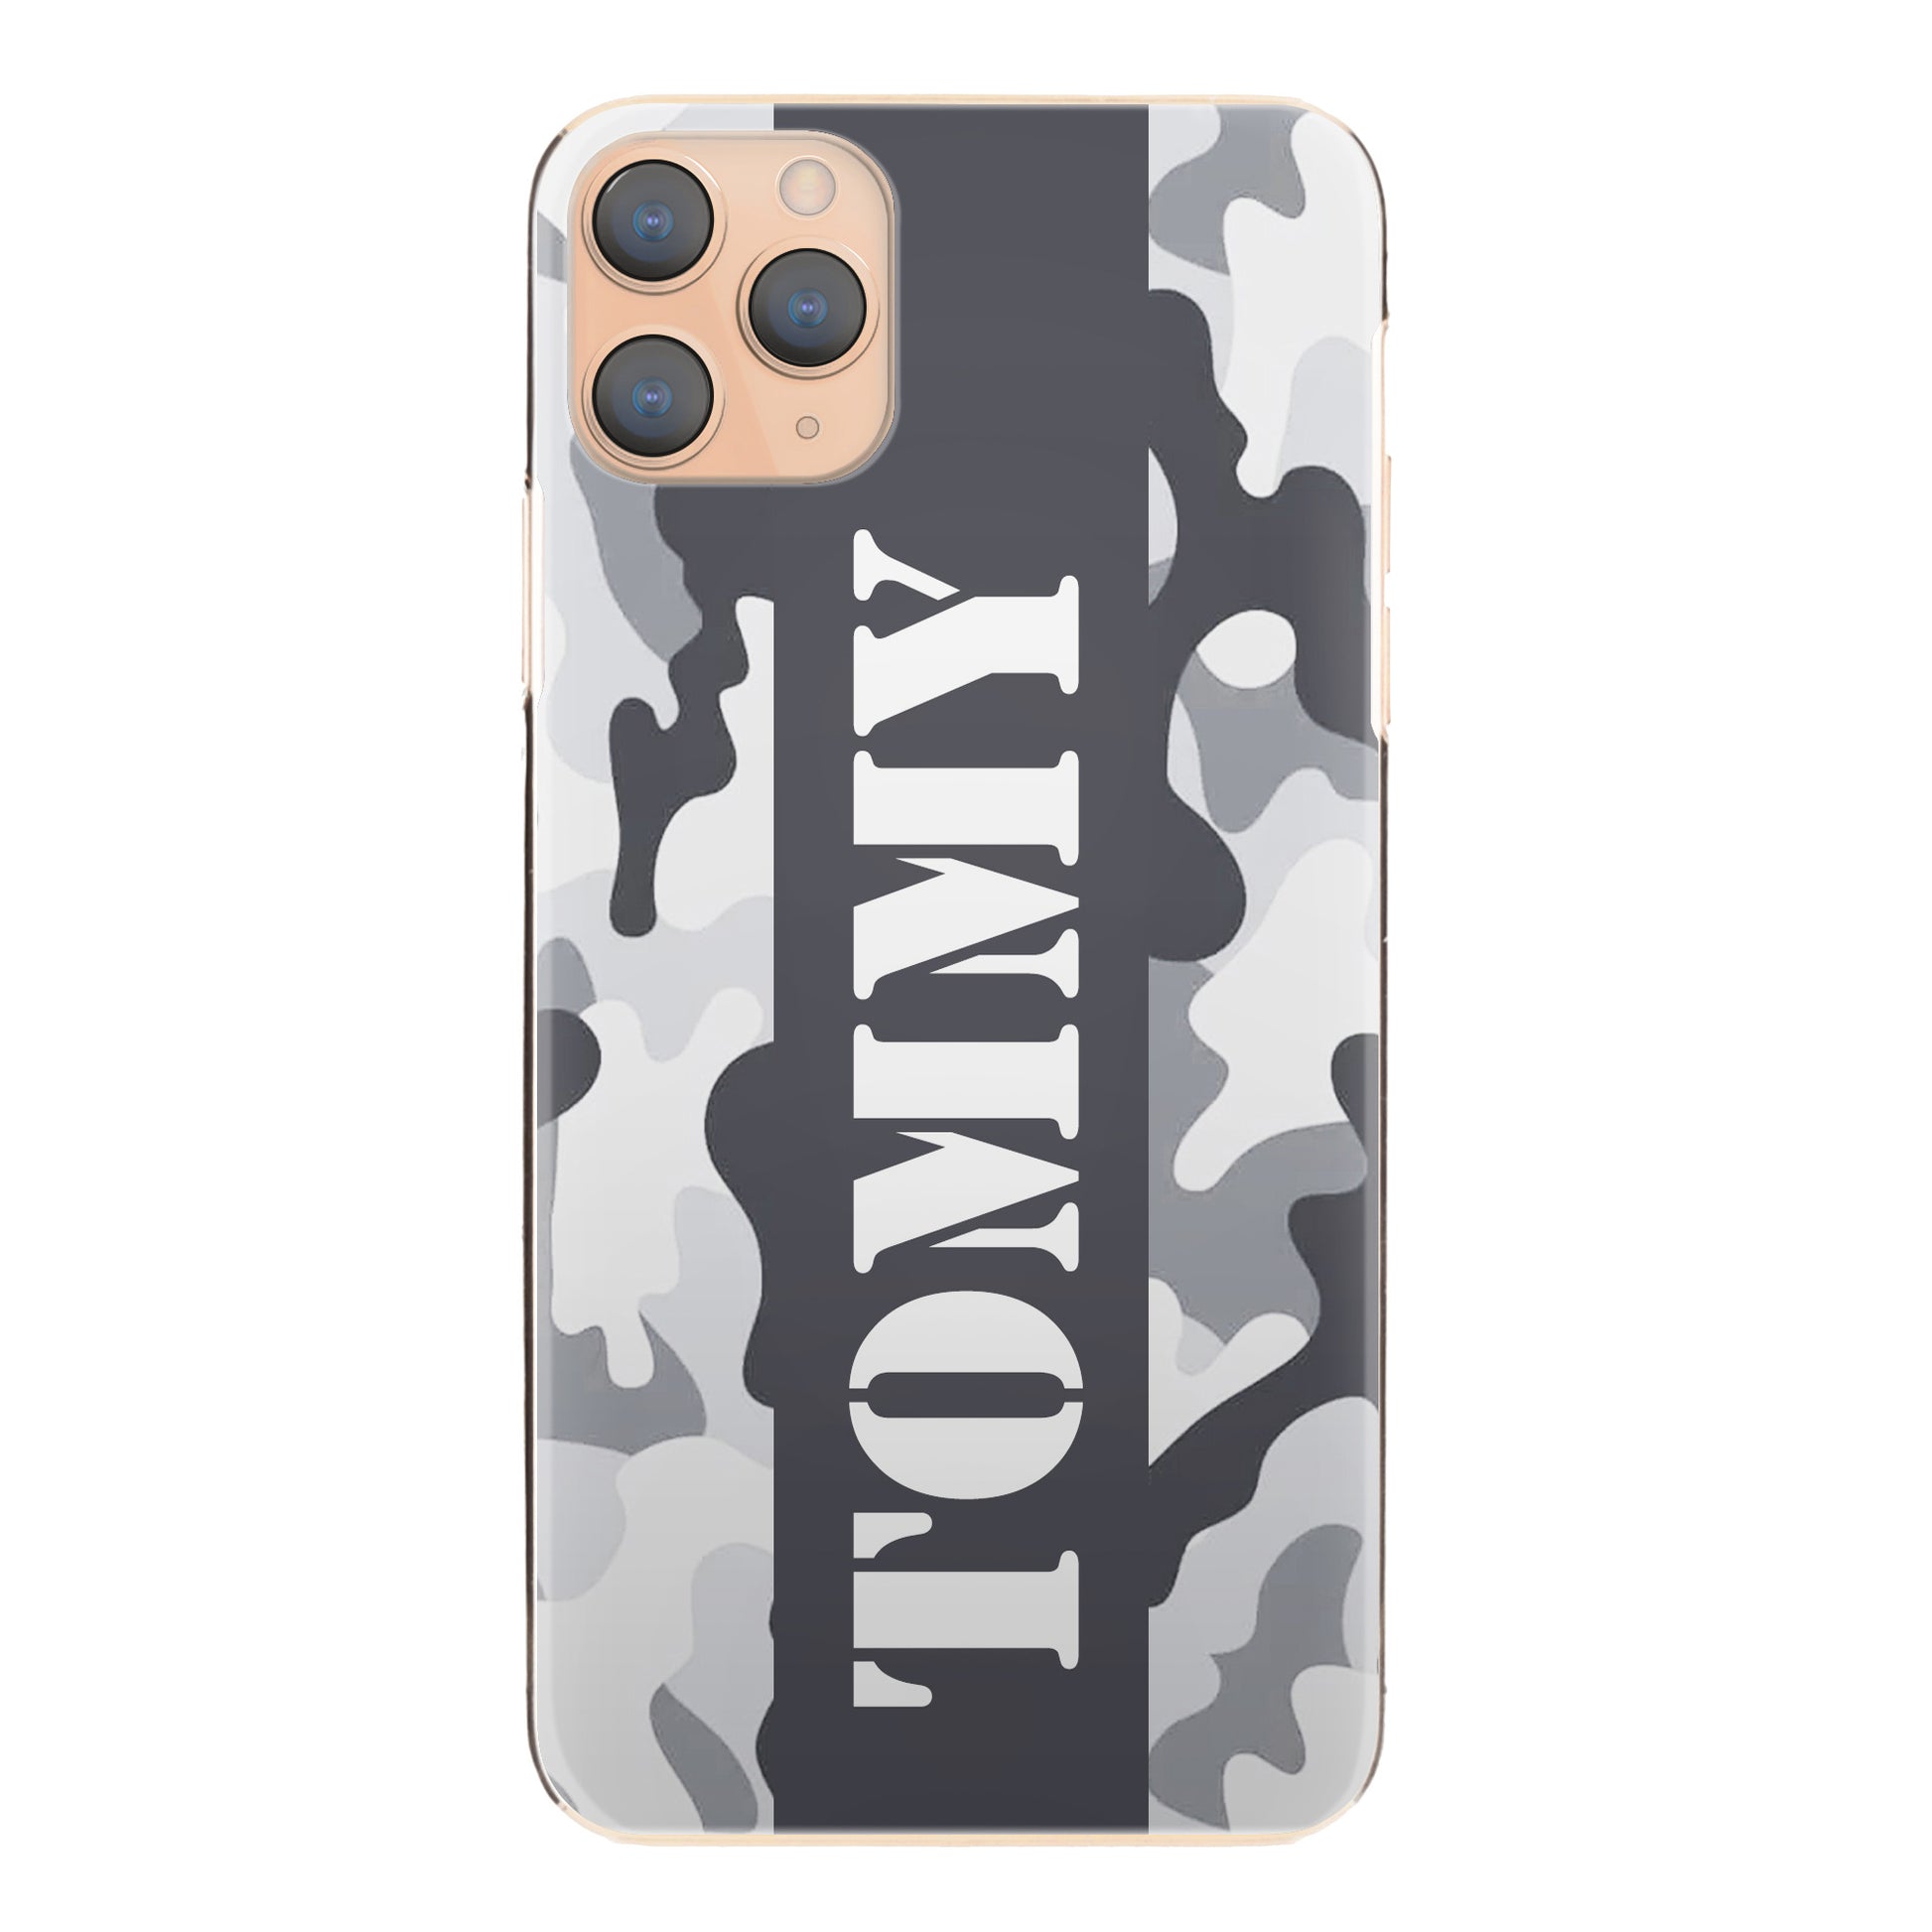 Personalised Xiaomi Phone Hard Case with Military Text on Artic Camo